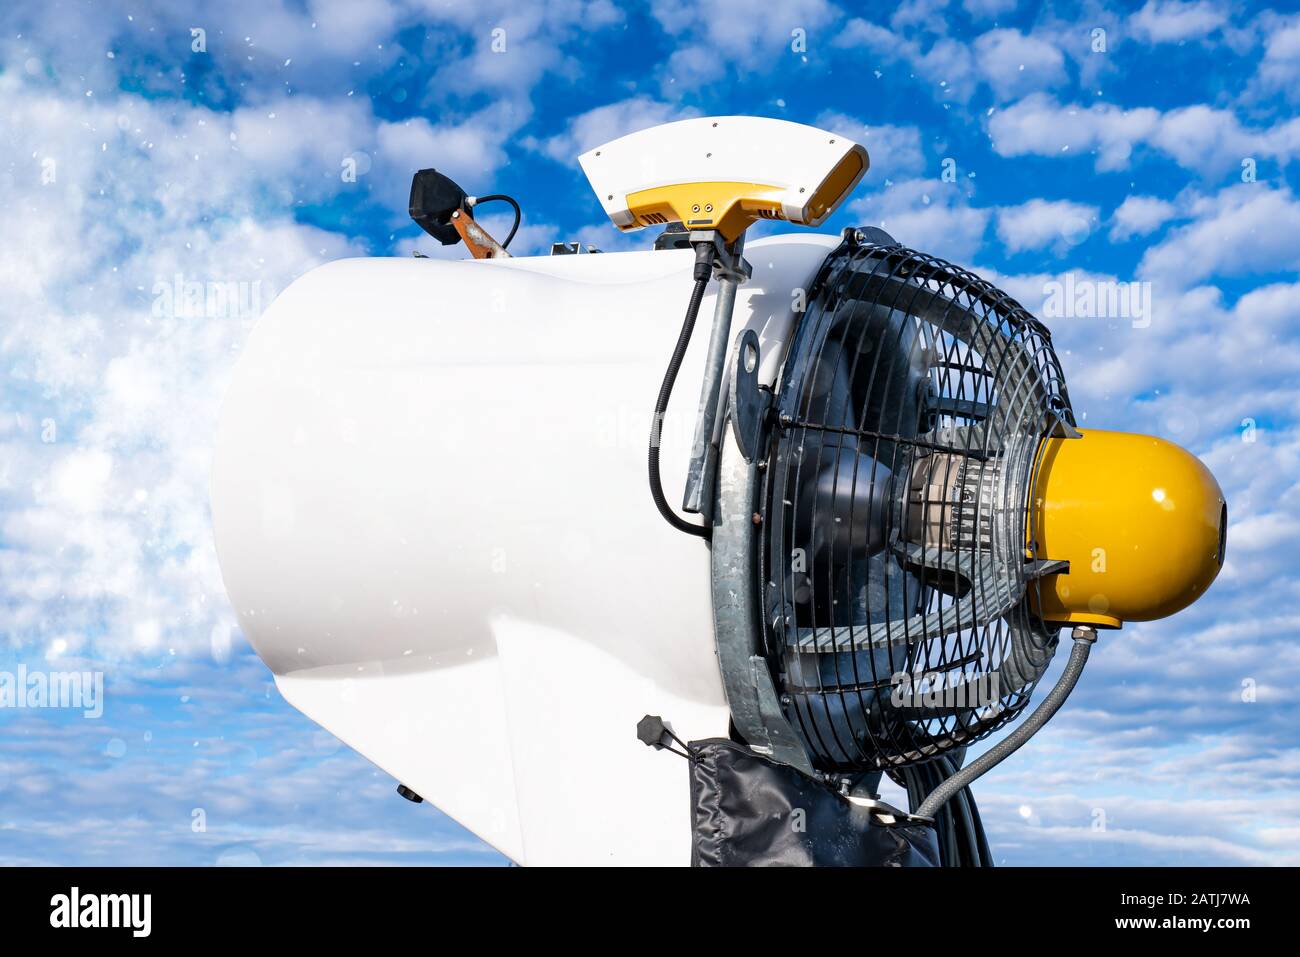 Close up of a snow cannon. Snow blows on the ski slopes. Blue sky with clouds. Stock Photo